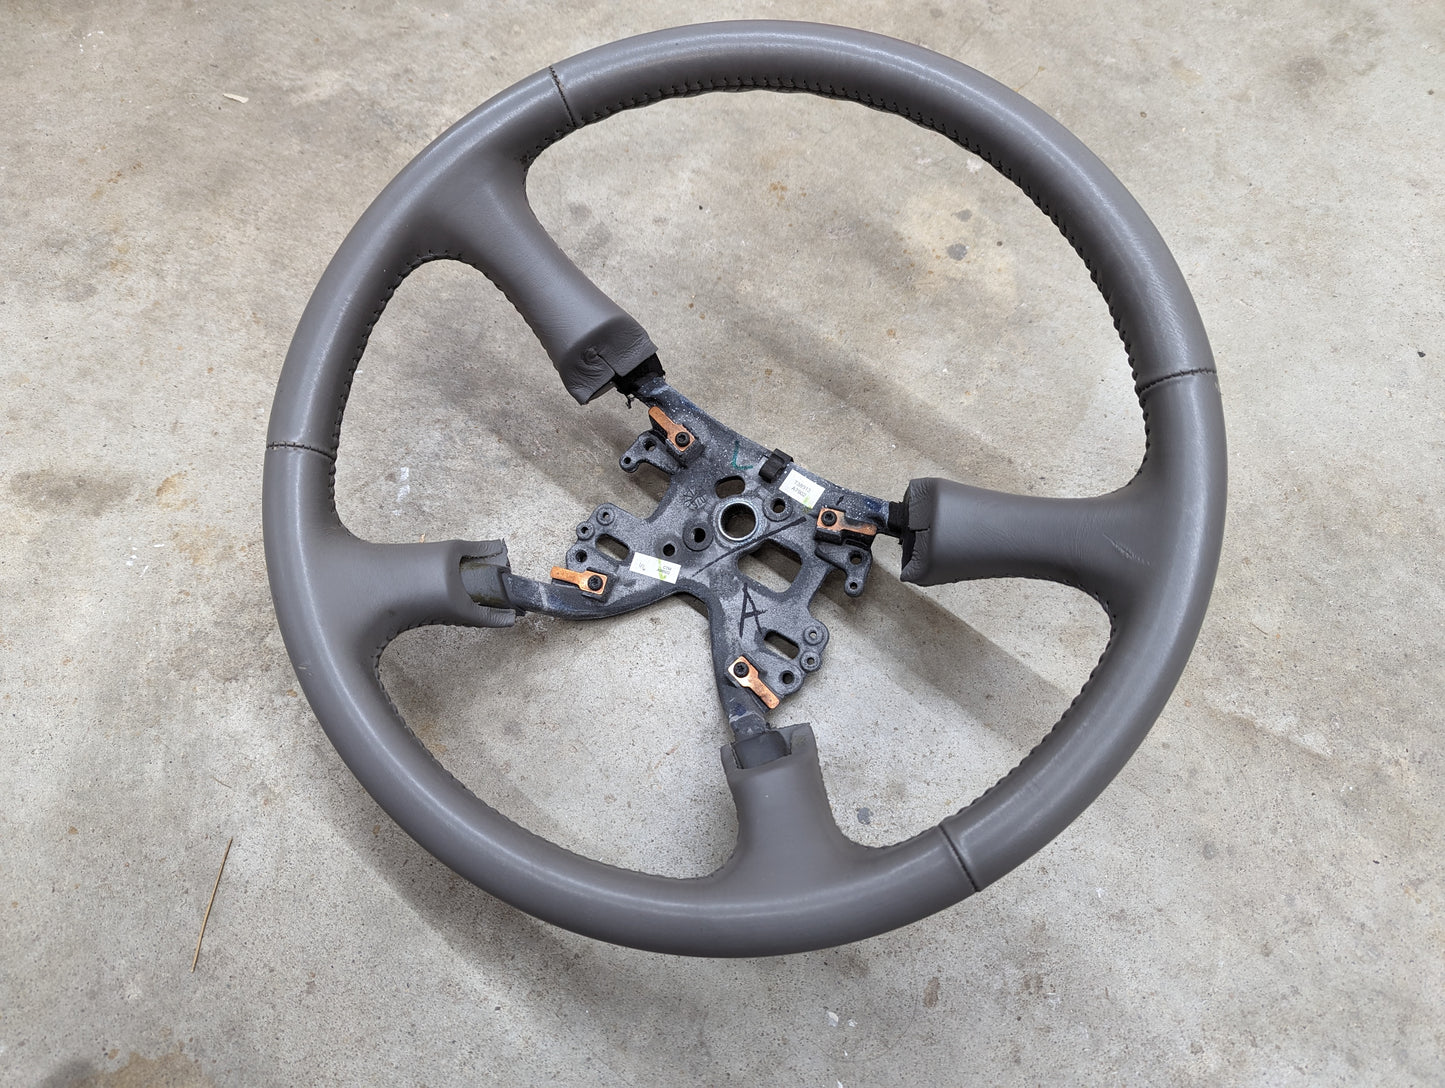 OEM Leather Steering Wheel in Gray for 1999-2005 GMC Denali Chevy Silverado S10 and more